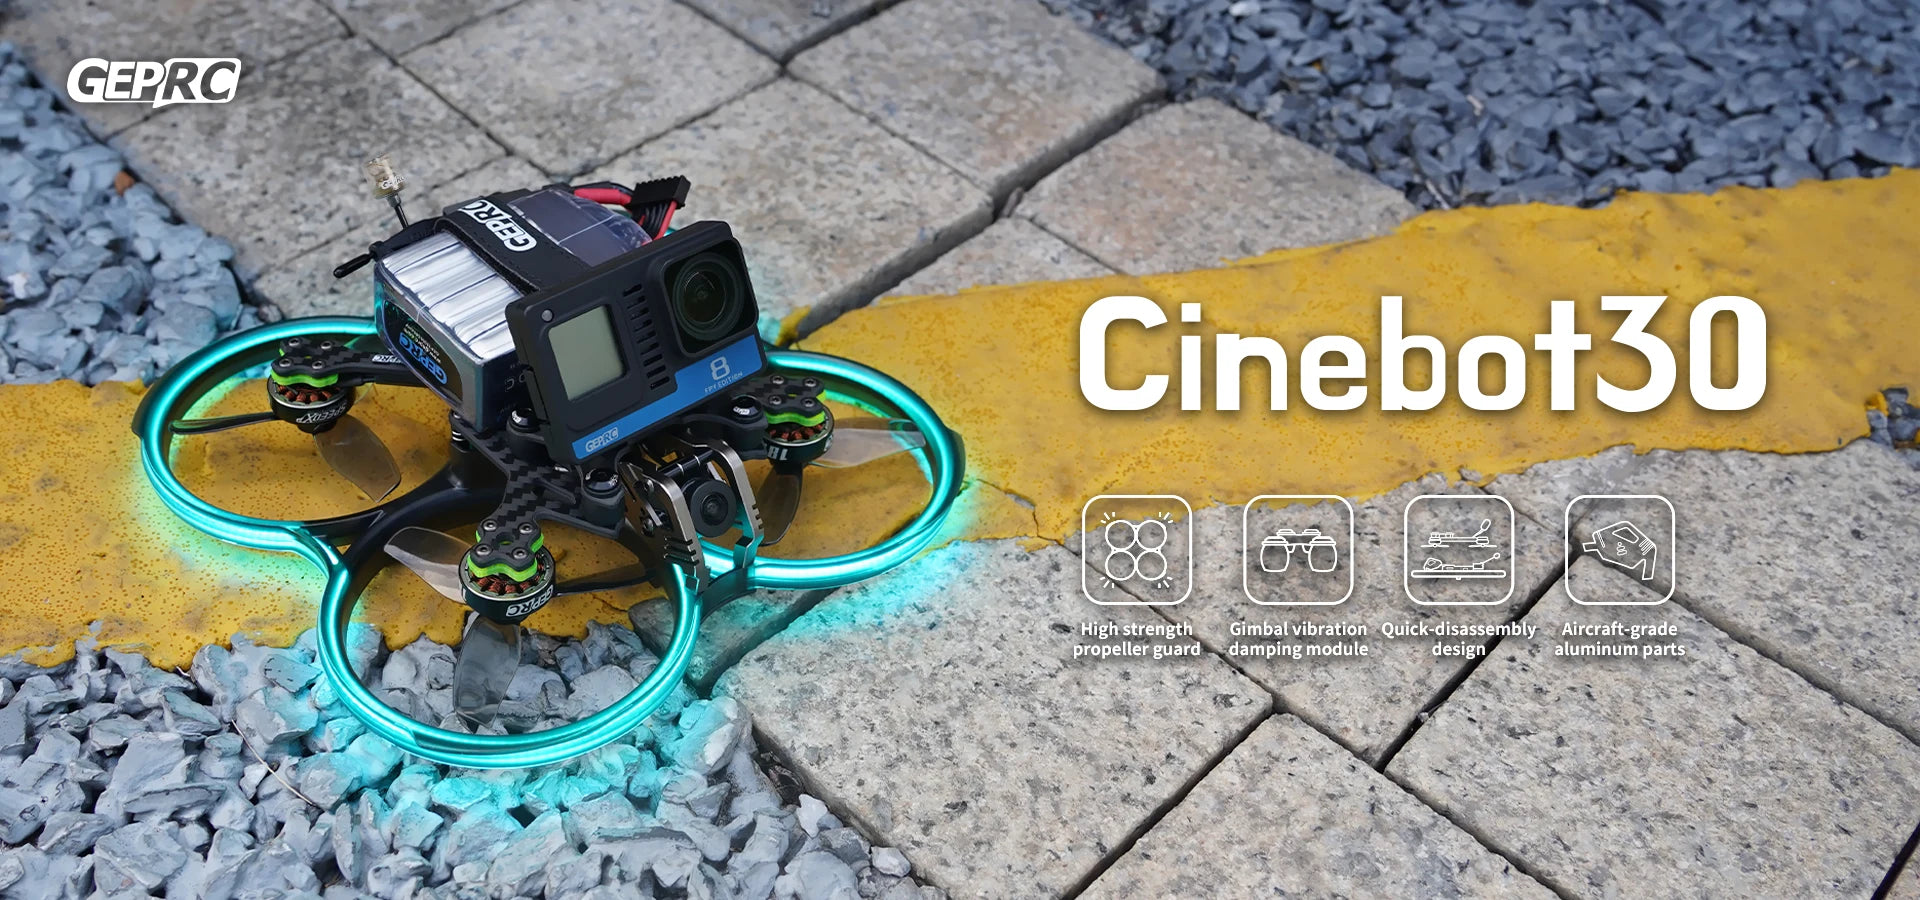 GEPRC NEW Cinebot30  FPV Drone, GEPRC 8 Cinebot3o High strength Gimbal vibration: Quick-dis